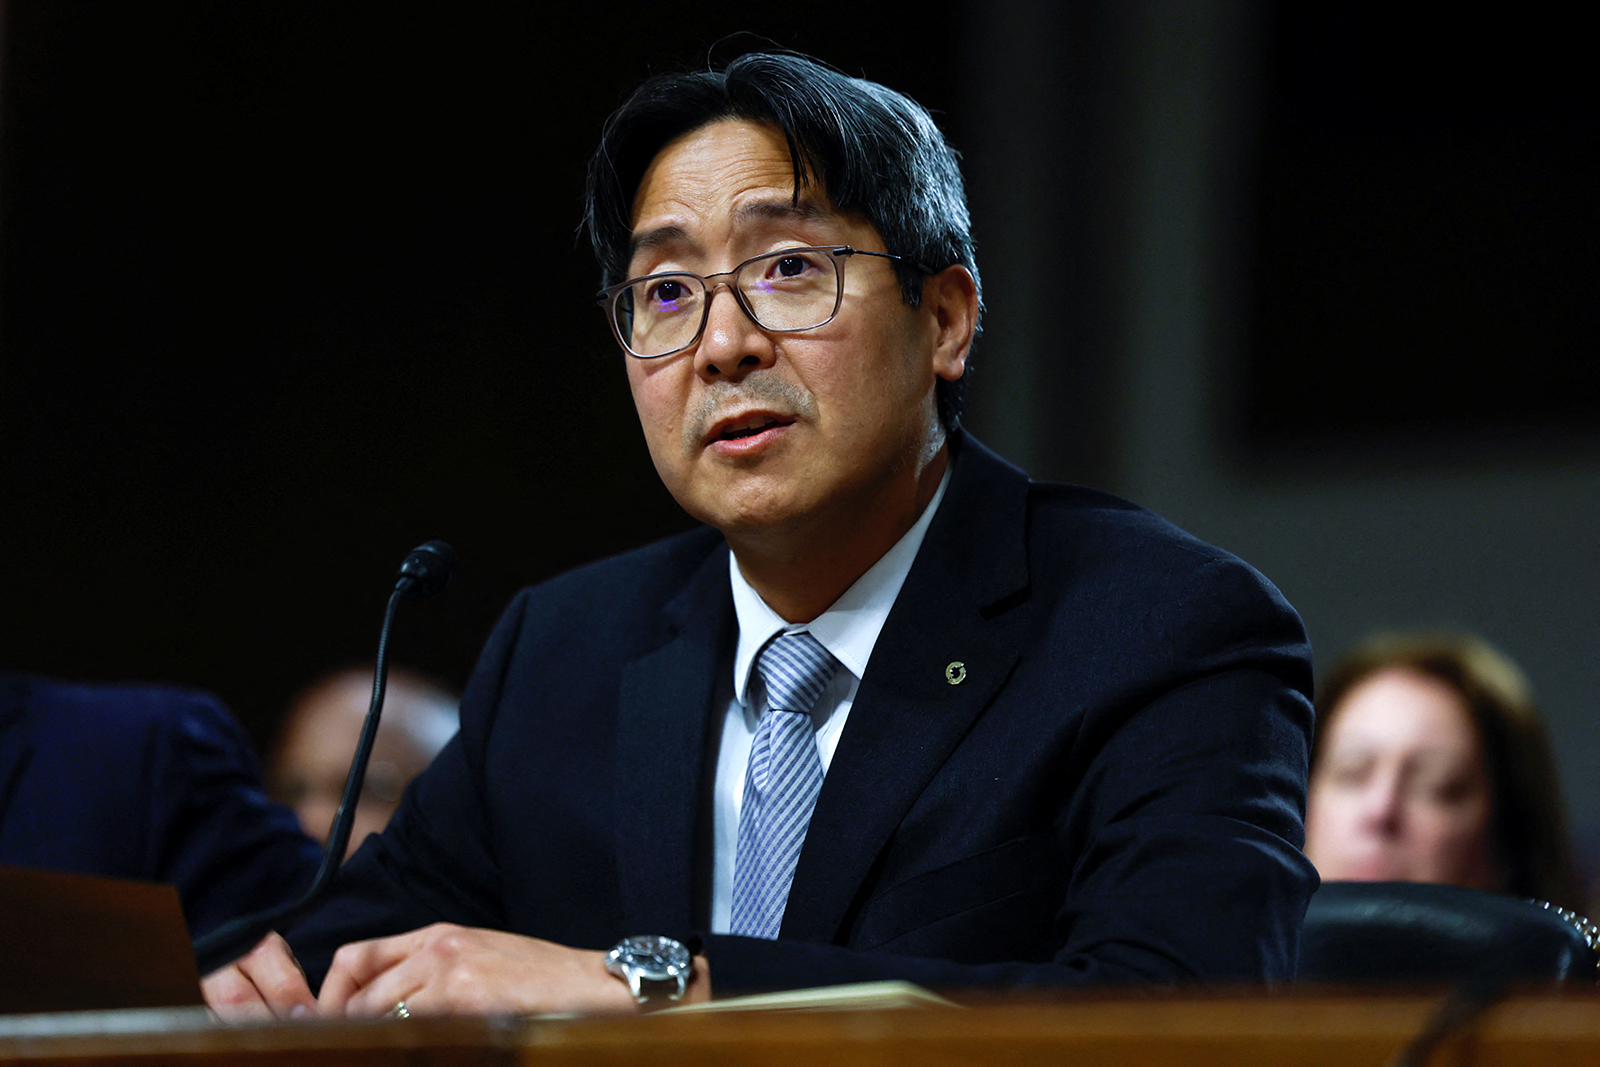 Acting Comptroller of the Currency, Michael Hsu, testified before a Senate Banking, Housing, and Urban Affairs Committee hearing in the wake of recent bank failures, on Capitol Hill in Washington today.